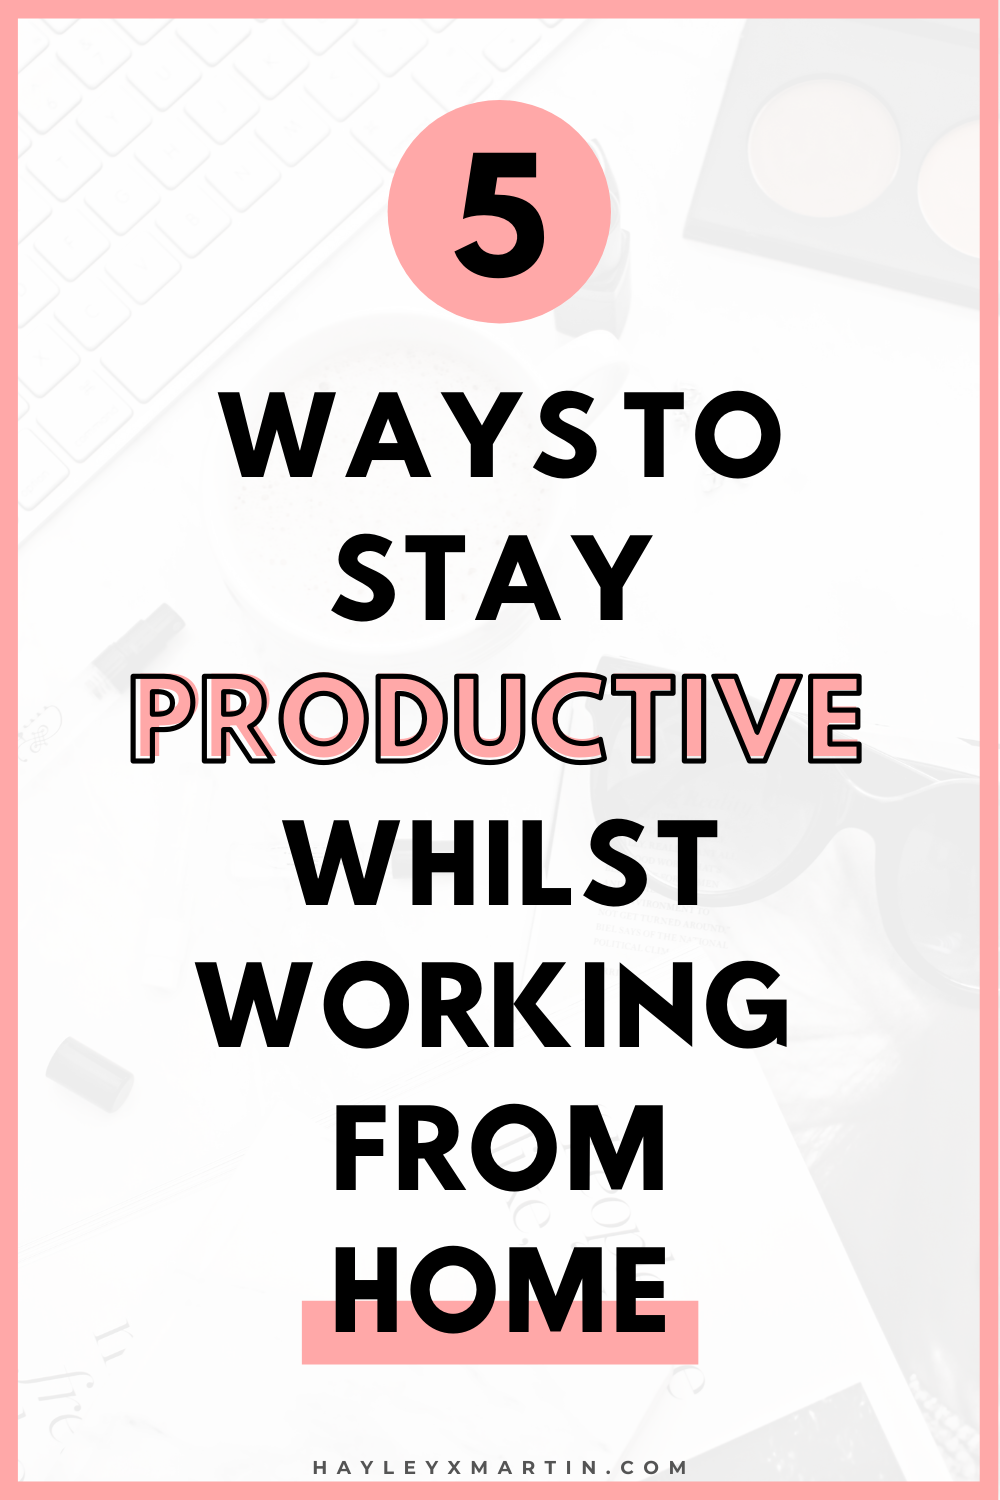 5 WAYS TO STAY PRODUCTIVE WHILST WORKING FROM HOME | HAYLEYXMARTIN